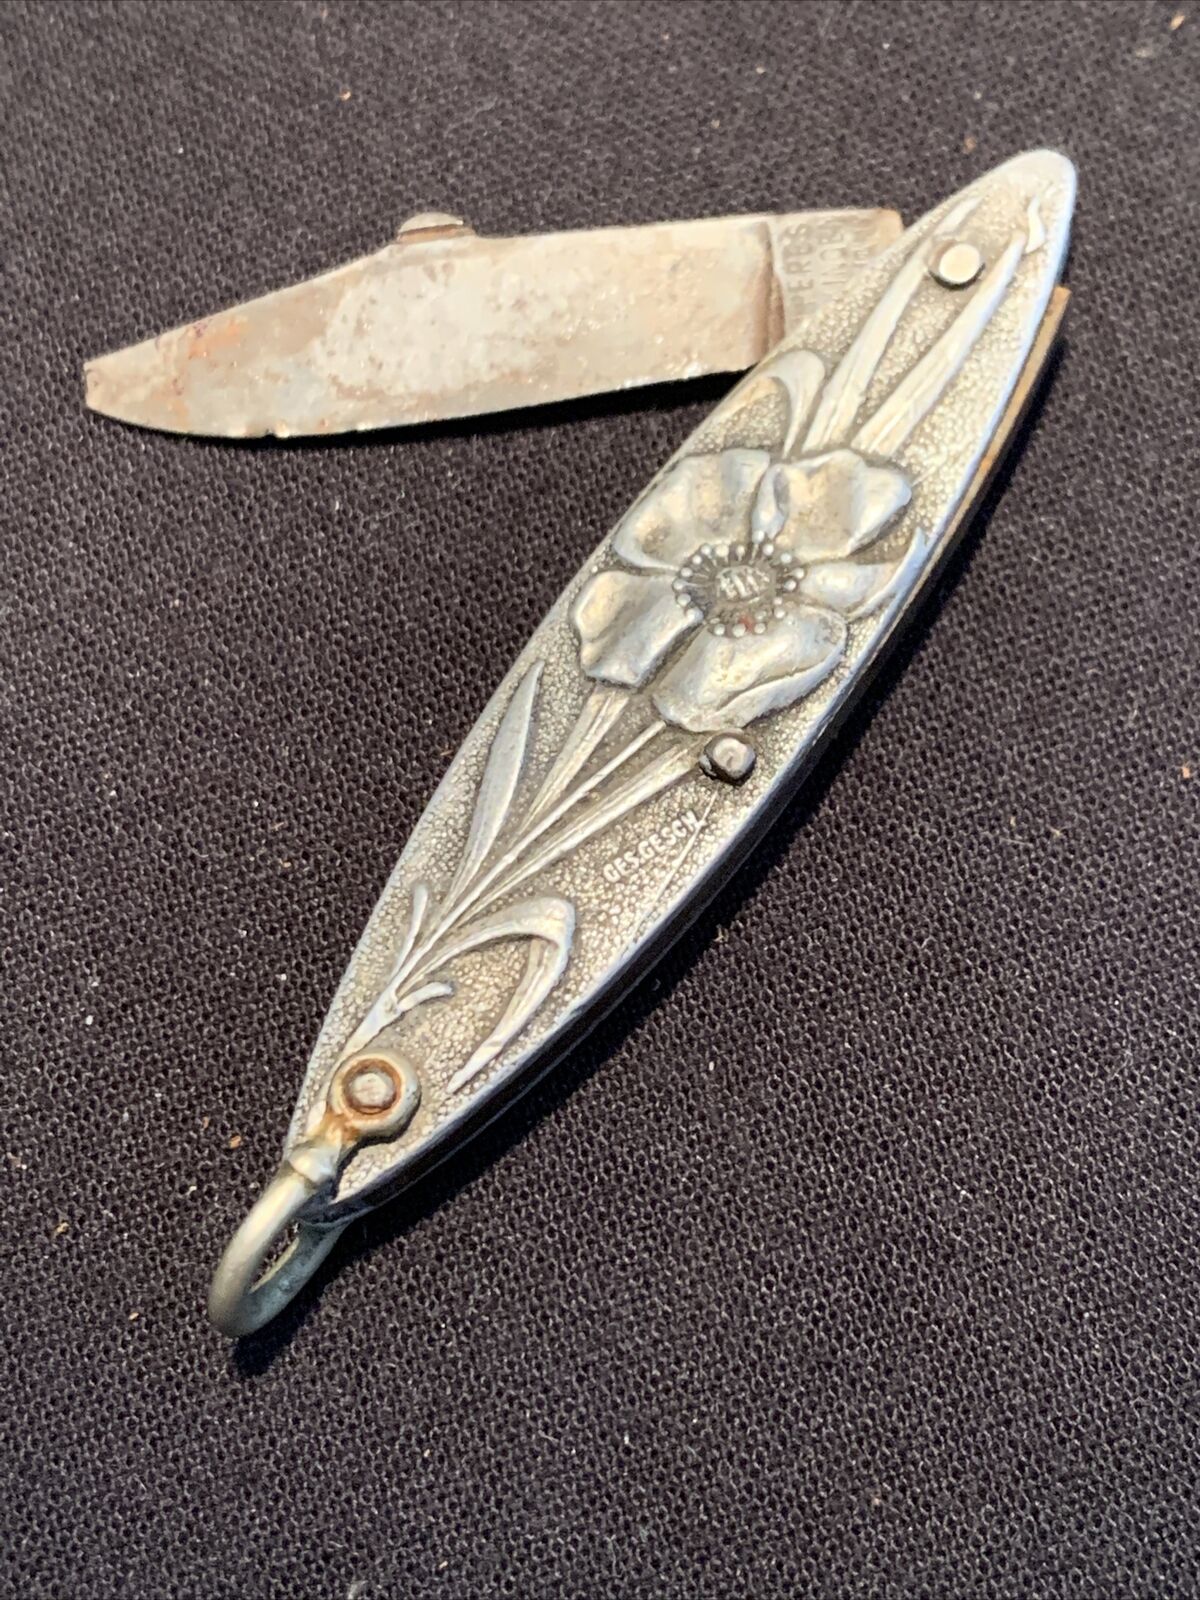 Antique D Peres Germany Embossed Aluminum Pocket Knife Early 1900s Ges. Gesch